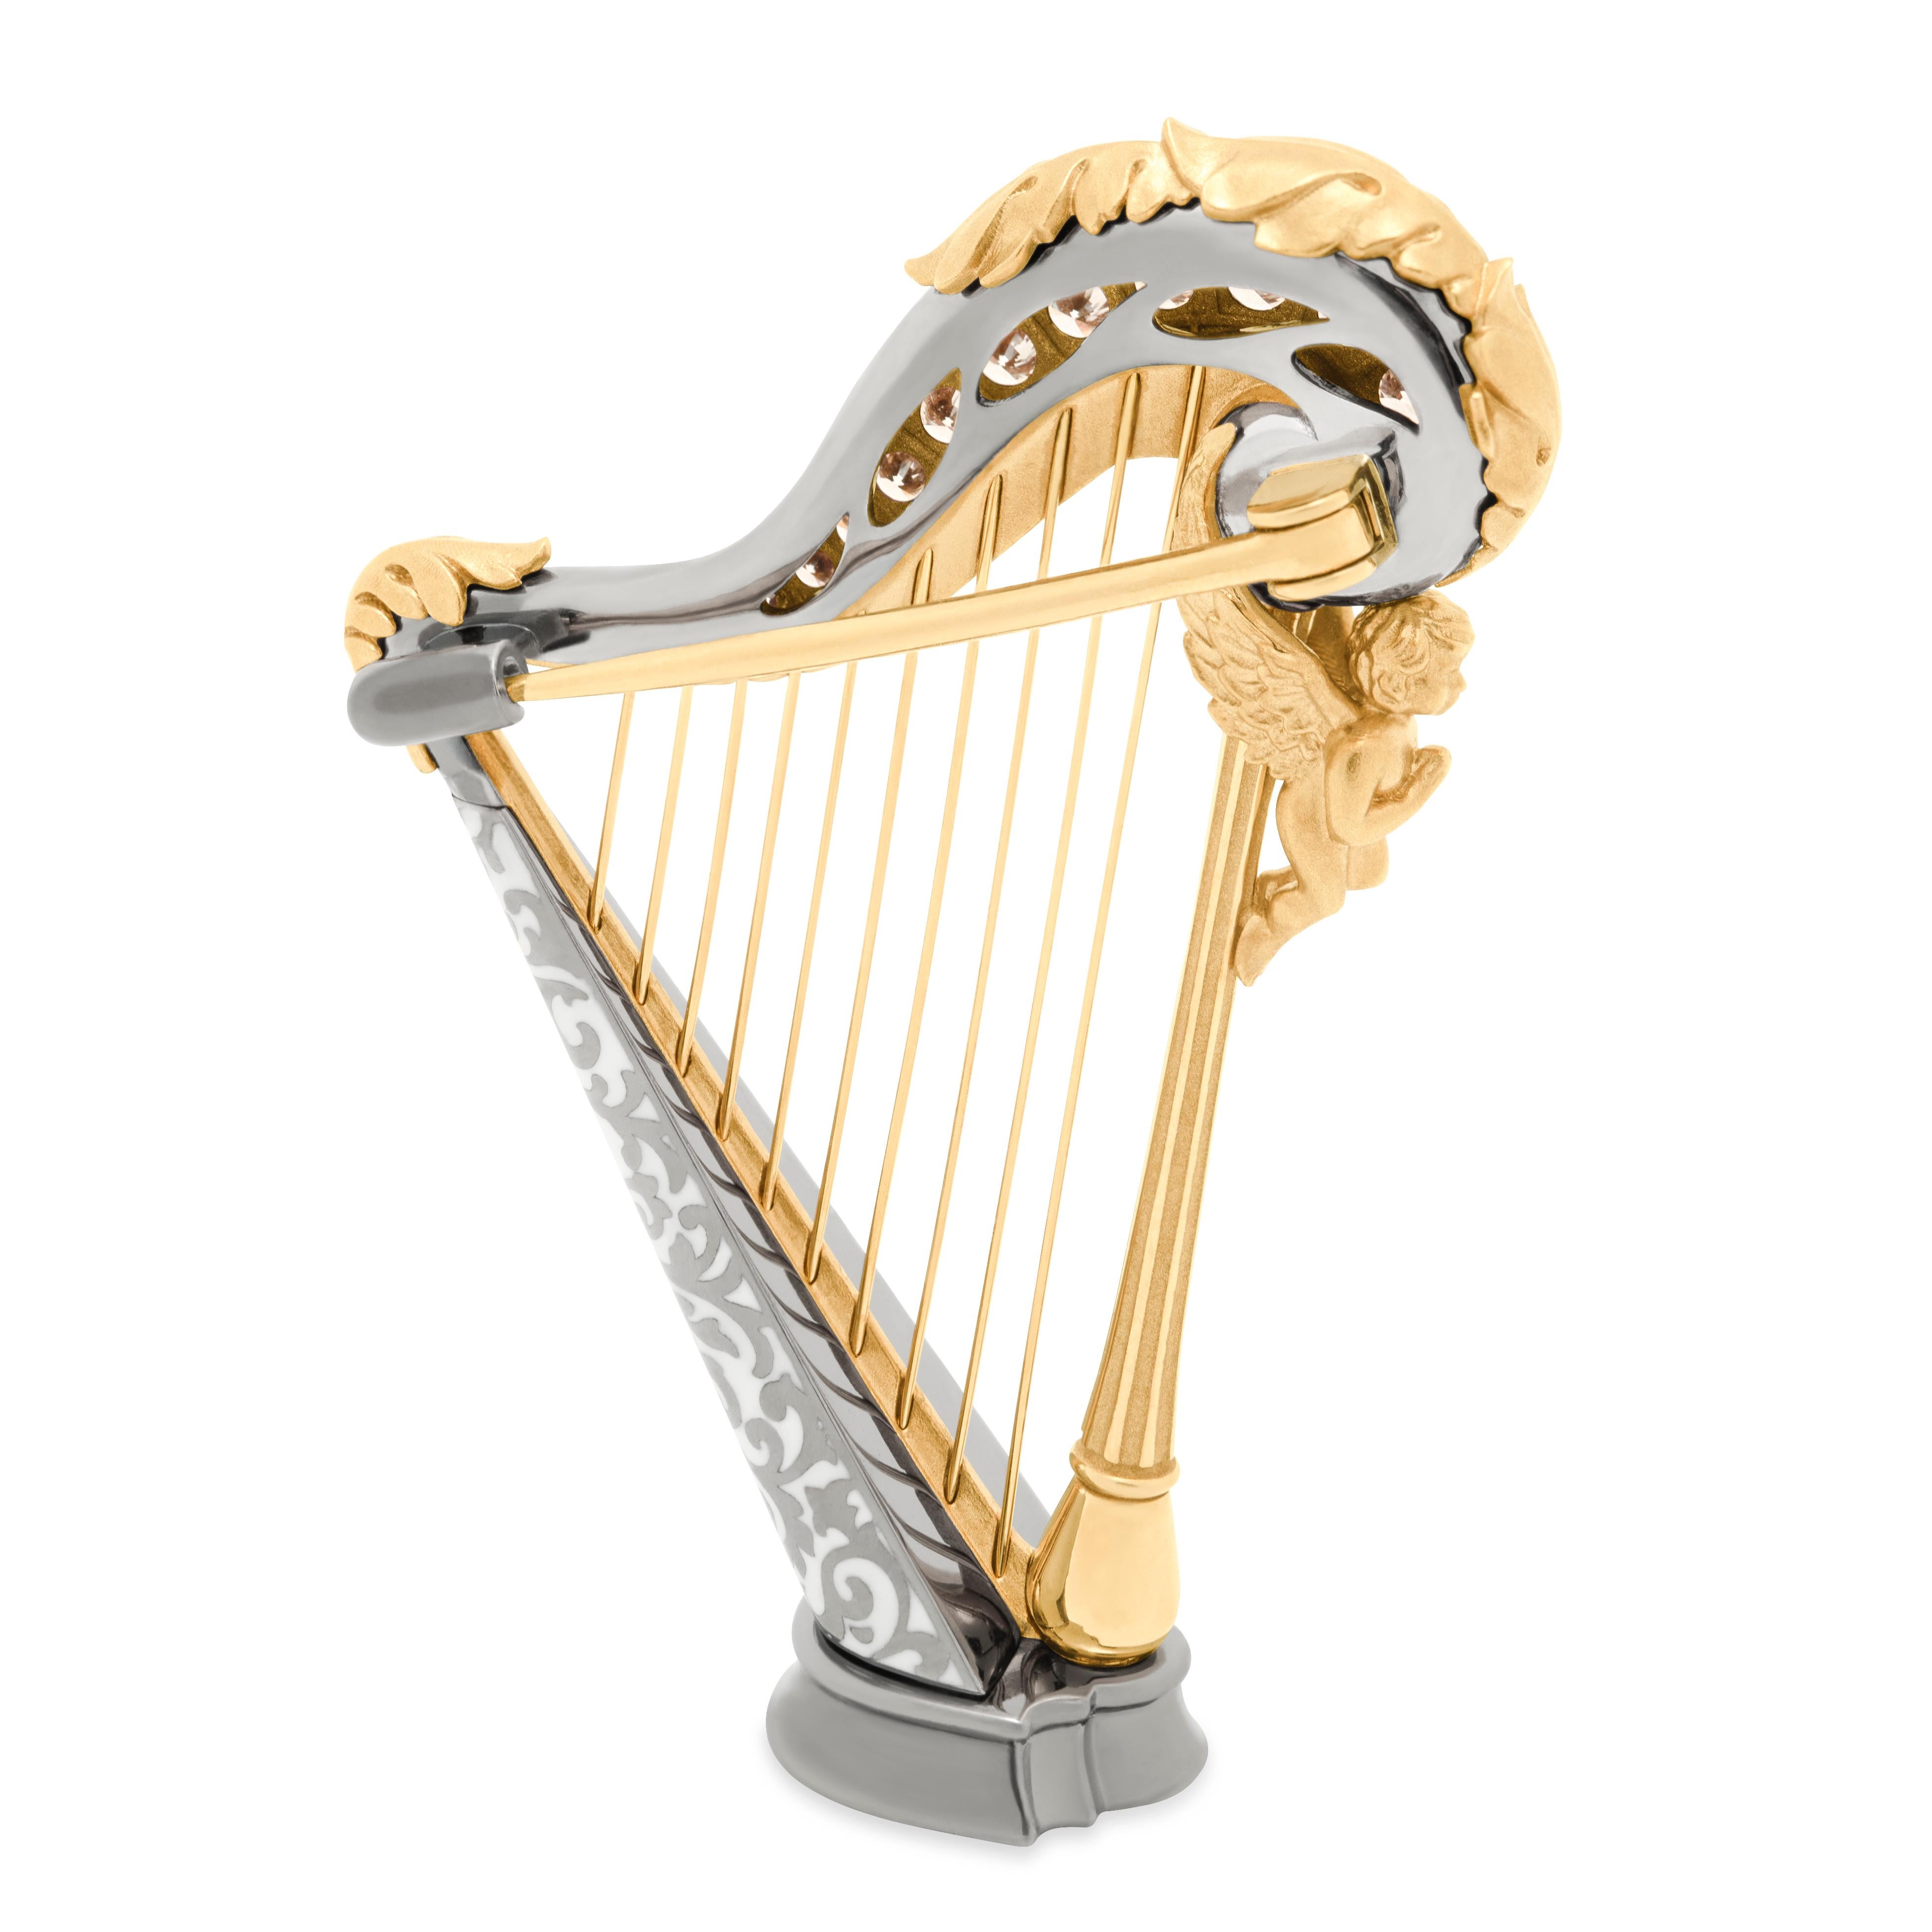 Champagne Diamond Enamel 18 Karat Yellow Gold Harp Brooch
Mousson Atelier represents with proud!
18 Karat Gold High detailing Harp brooch. Champagne Diamonds, all strings are tightened by hand. 
A small angel on the deck and Greek-style leaf